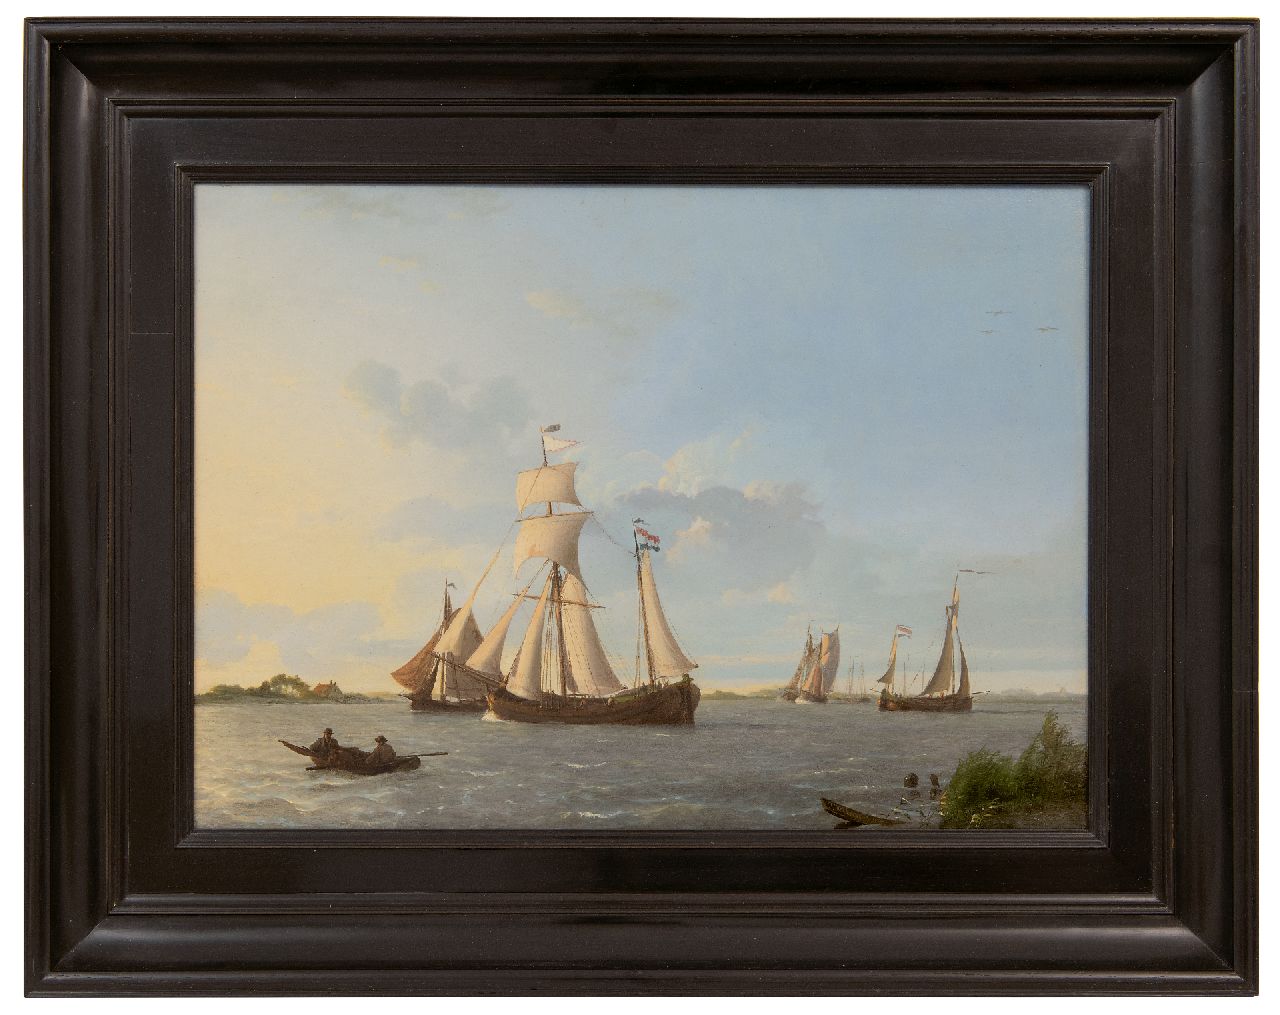 Koekkoek J.  | Johannes Koekkoek | Paintings offered for sale | Sailing ships on Dutch inland waters, oil on panel 32.3 x 44.8 cm, signed l.r. and dated 1829